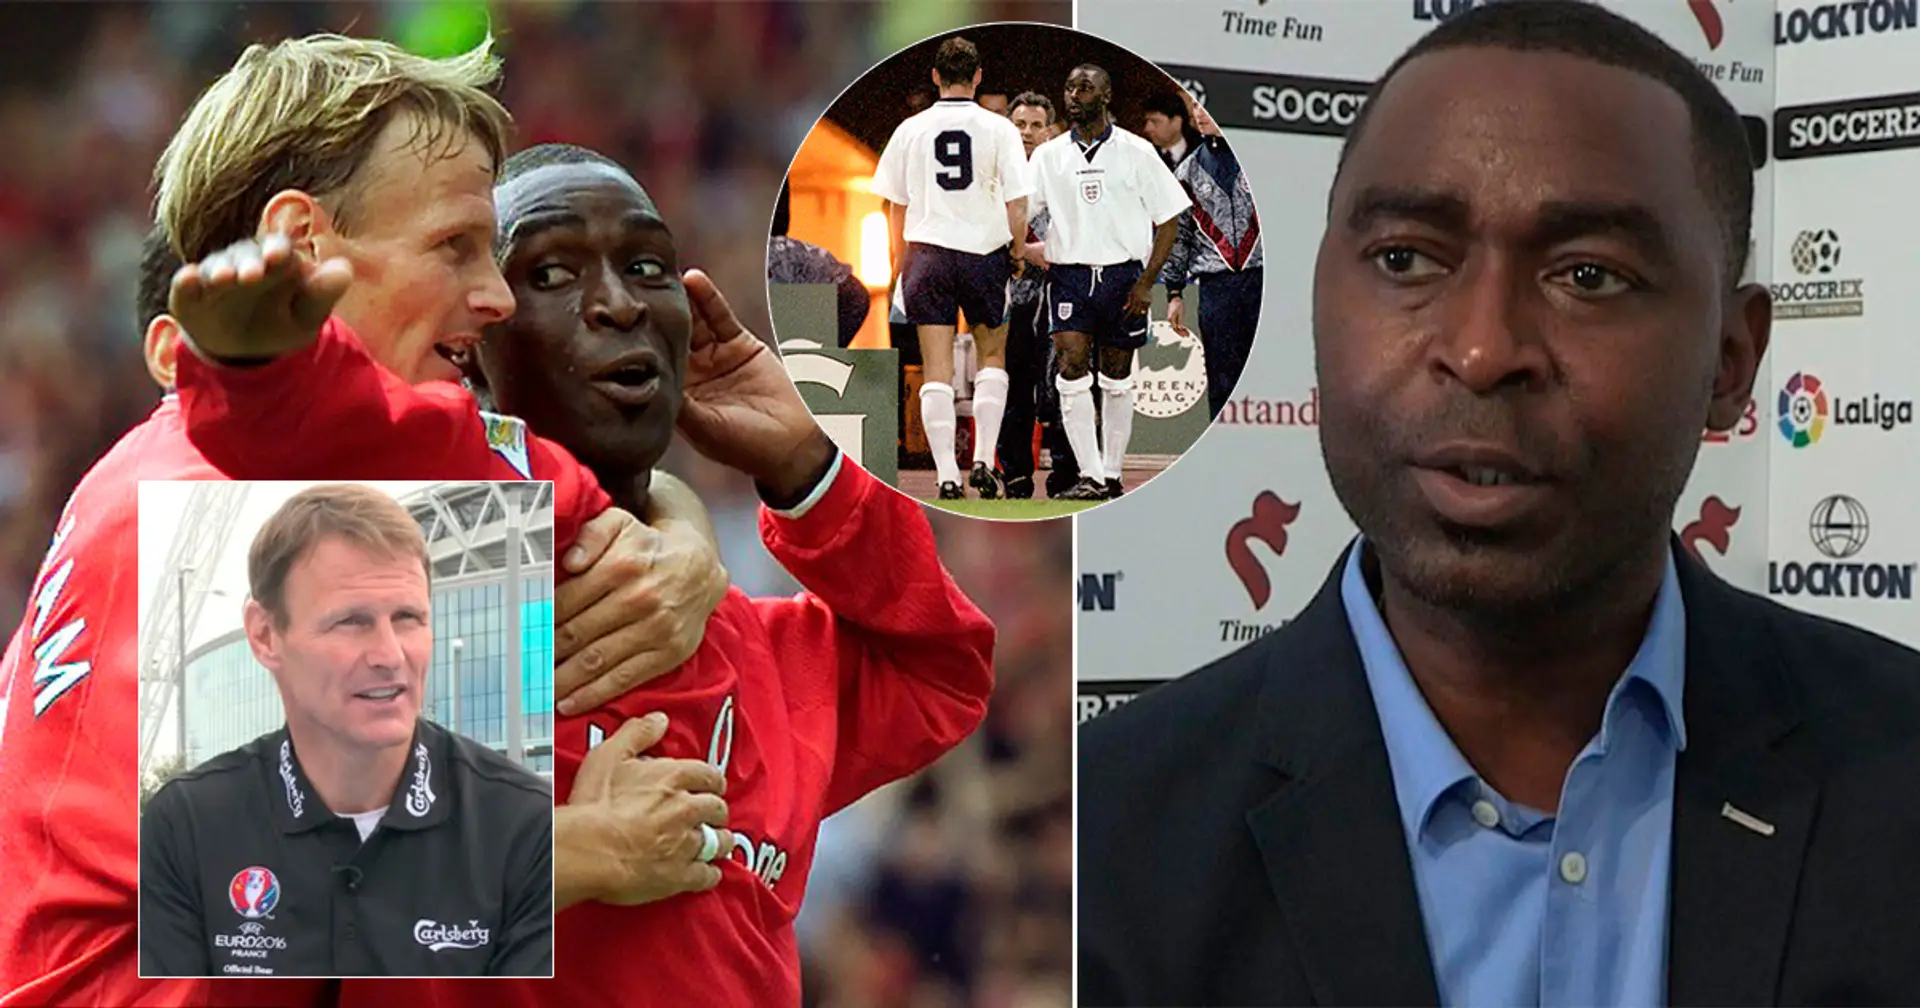 Why Andy Cole hated Teddy Sheringham and the players never spoke to each other